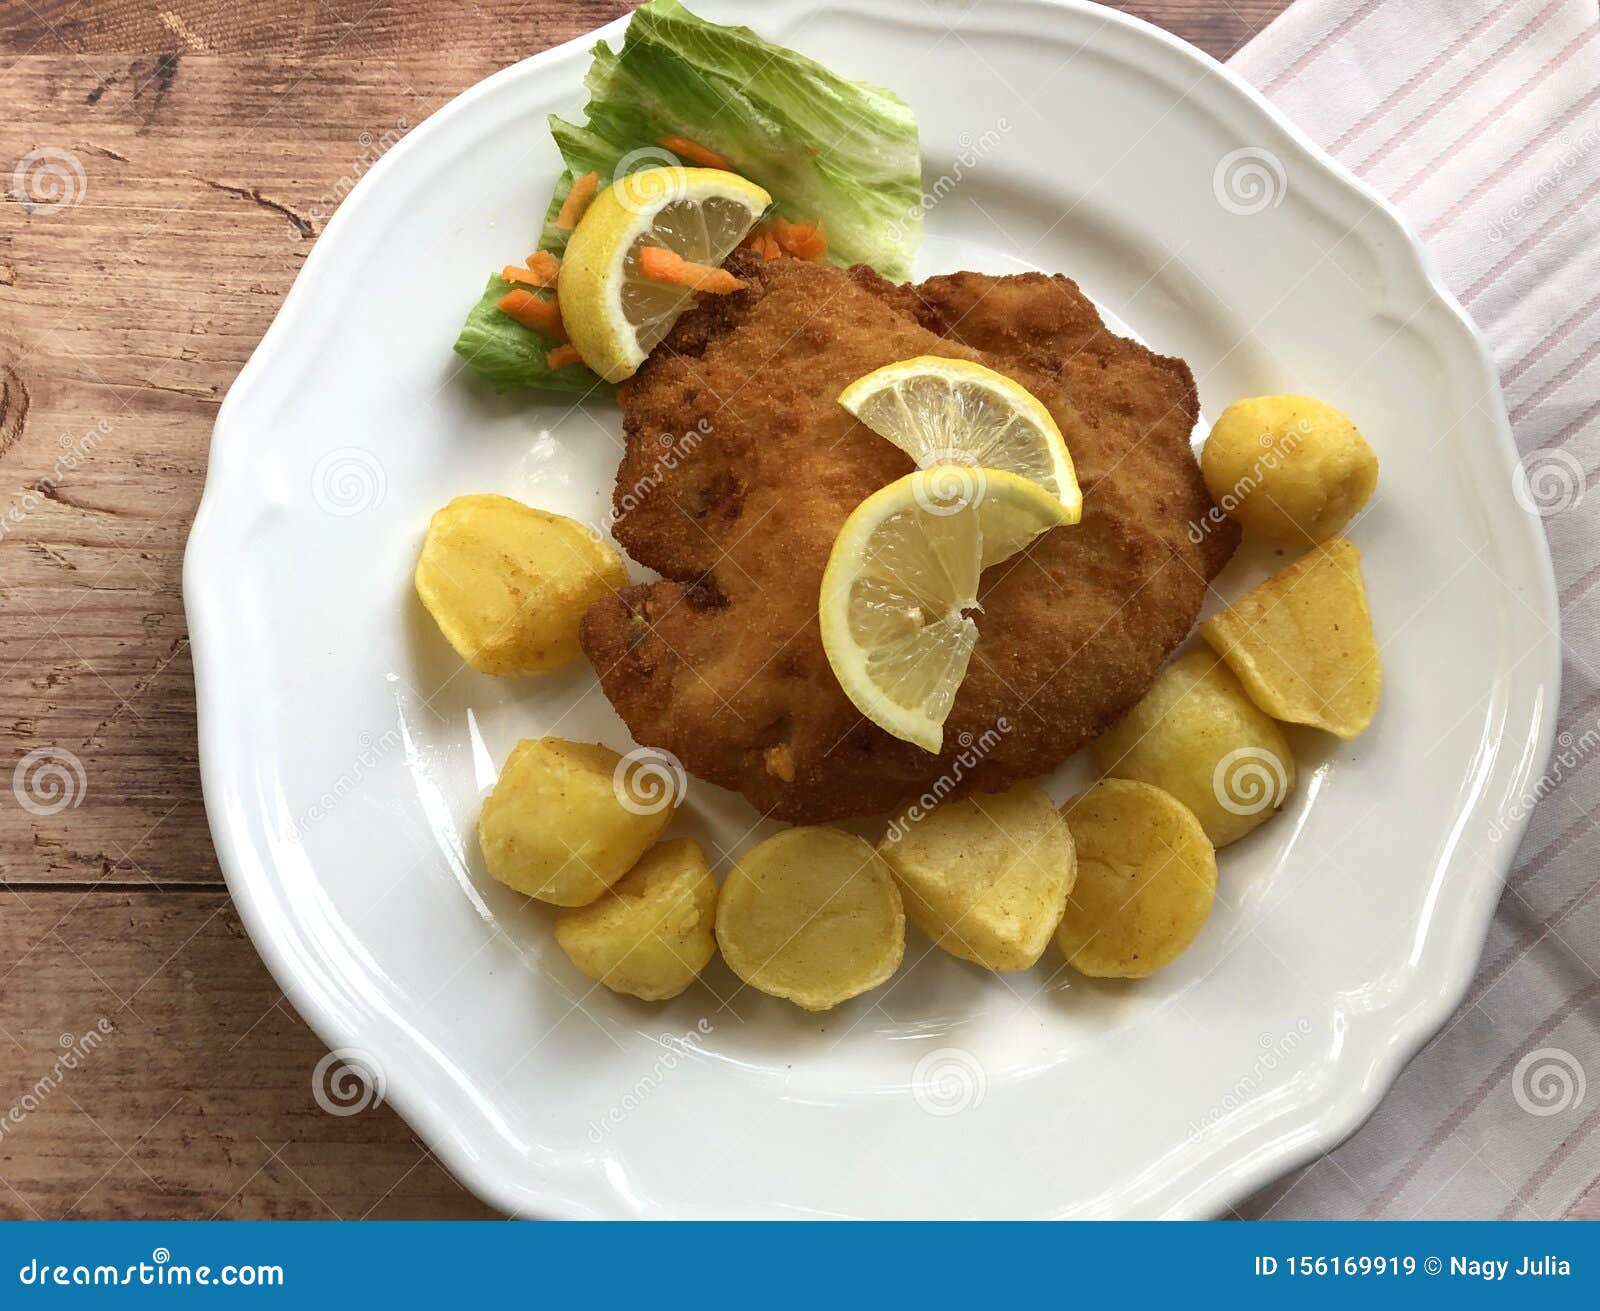 Schnitzel Cordon Bleu is a Breaded Schnitzel Stuffed with Cheese and ...